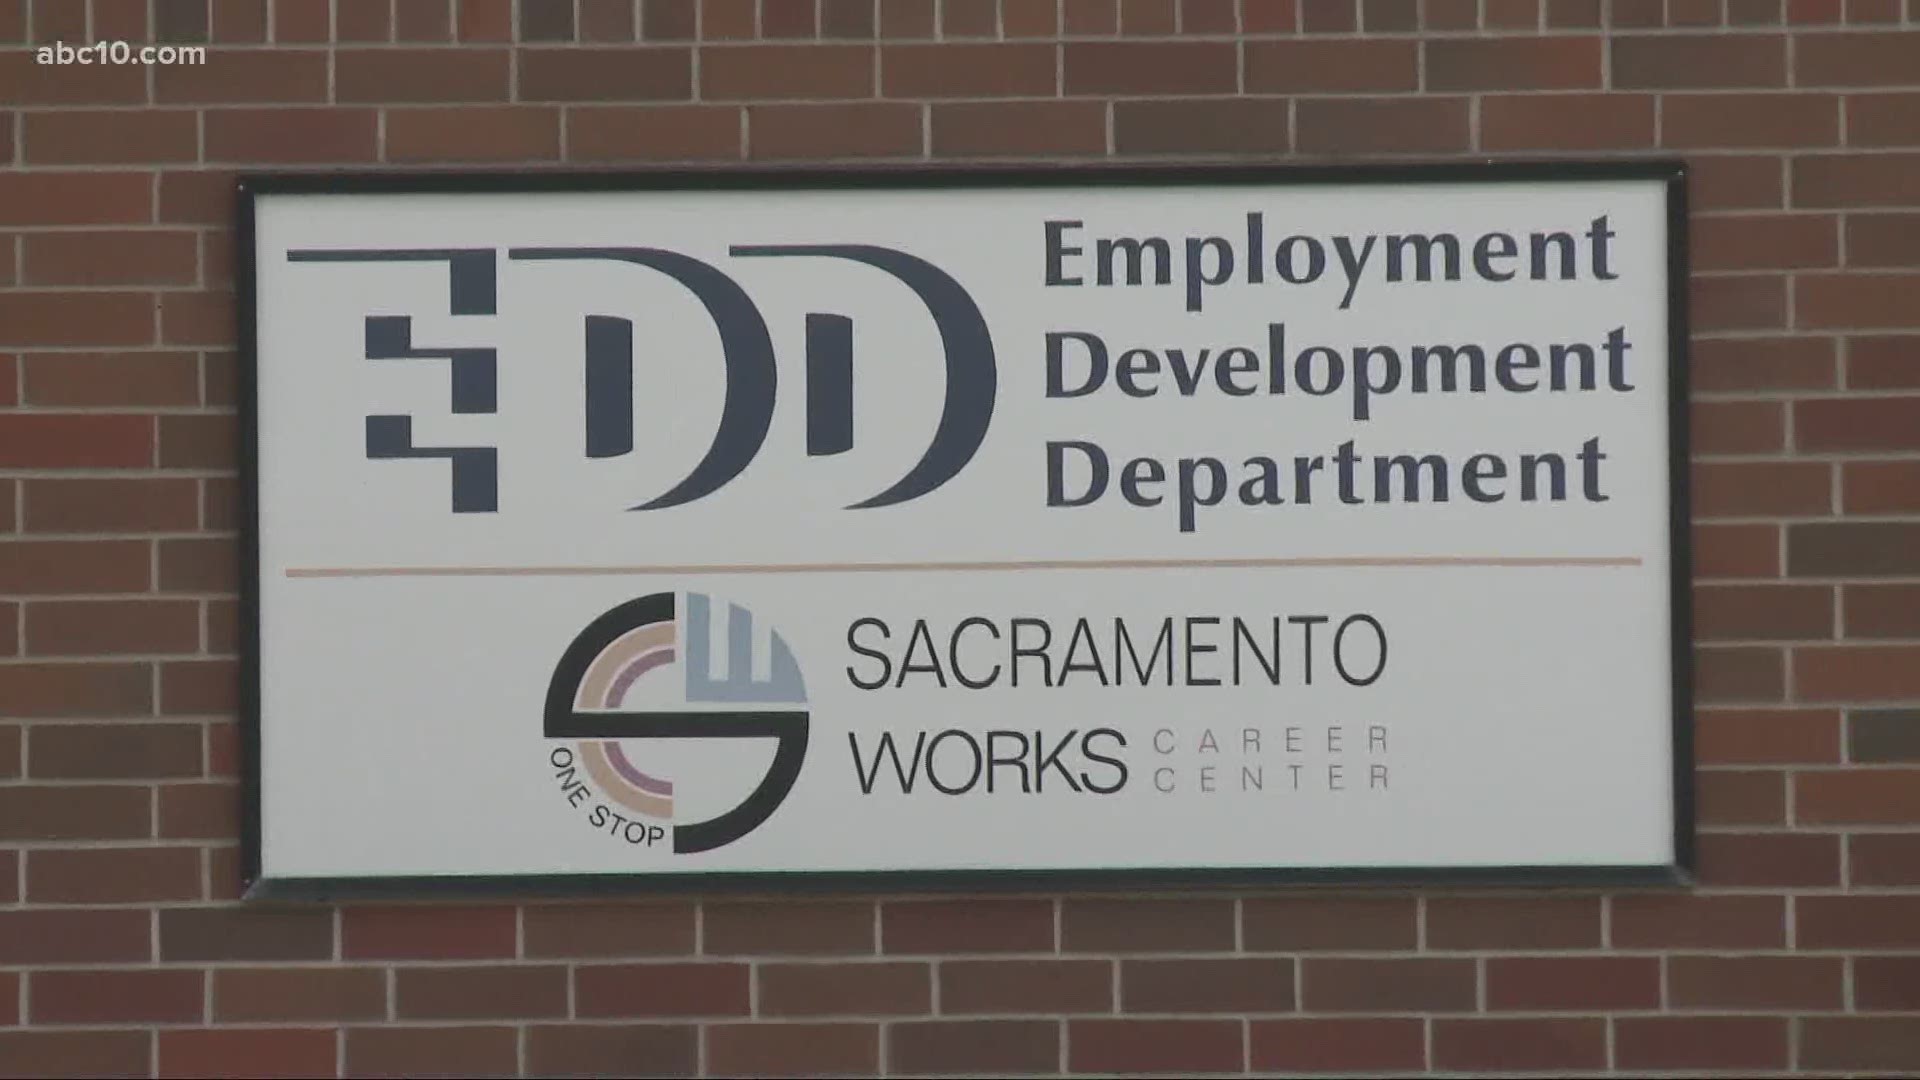 Many people have been laid off due to the coronavirus and the Employment Development Department is working to help them, despite long wait times.